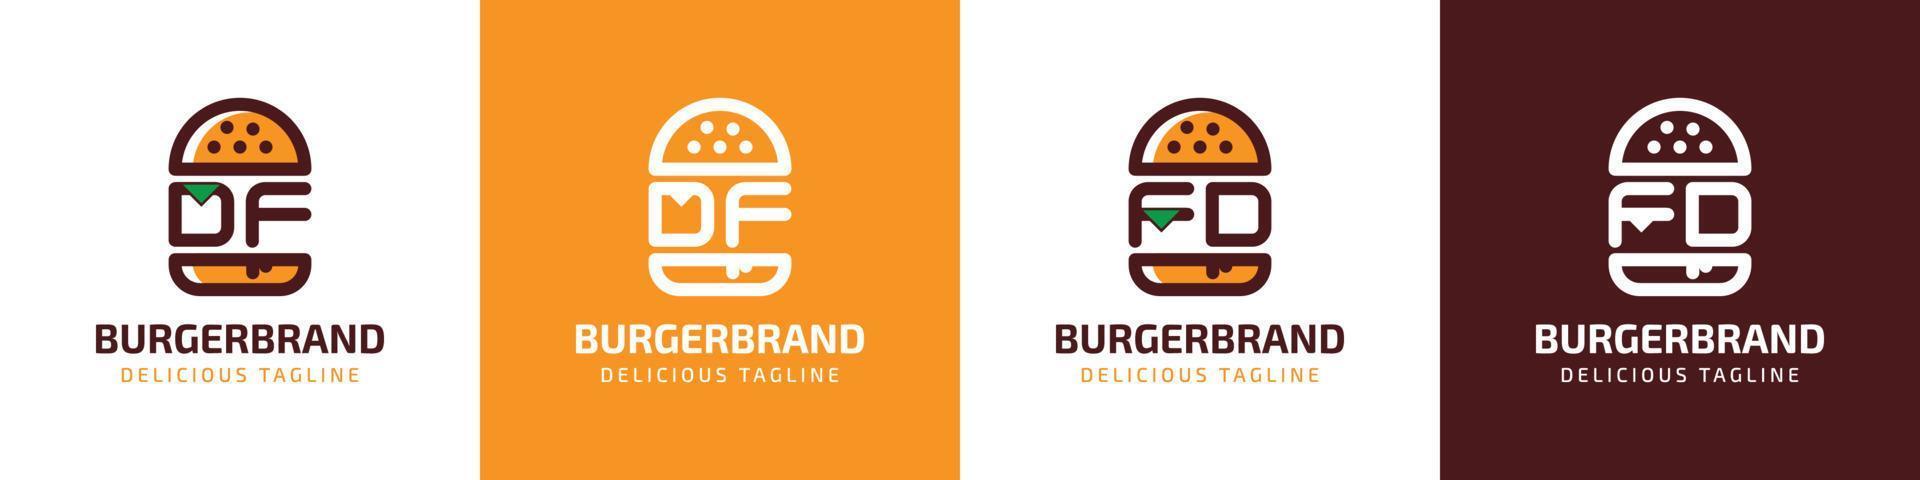 Letter DF and FD Burger Logo, suitable for any business related to burger with DF or FD initials. vector